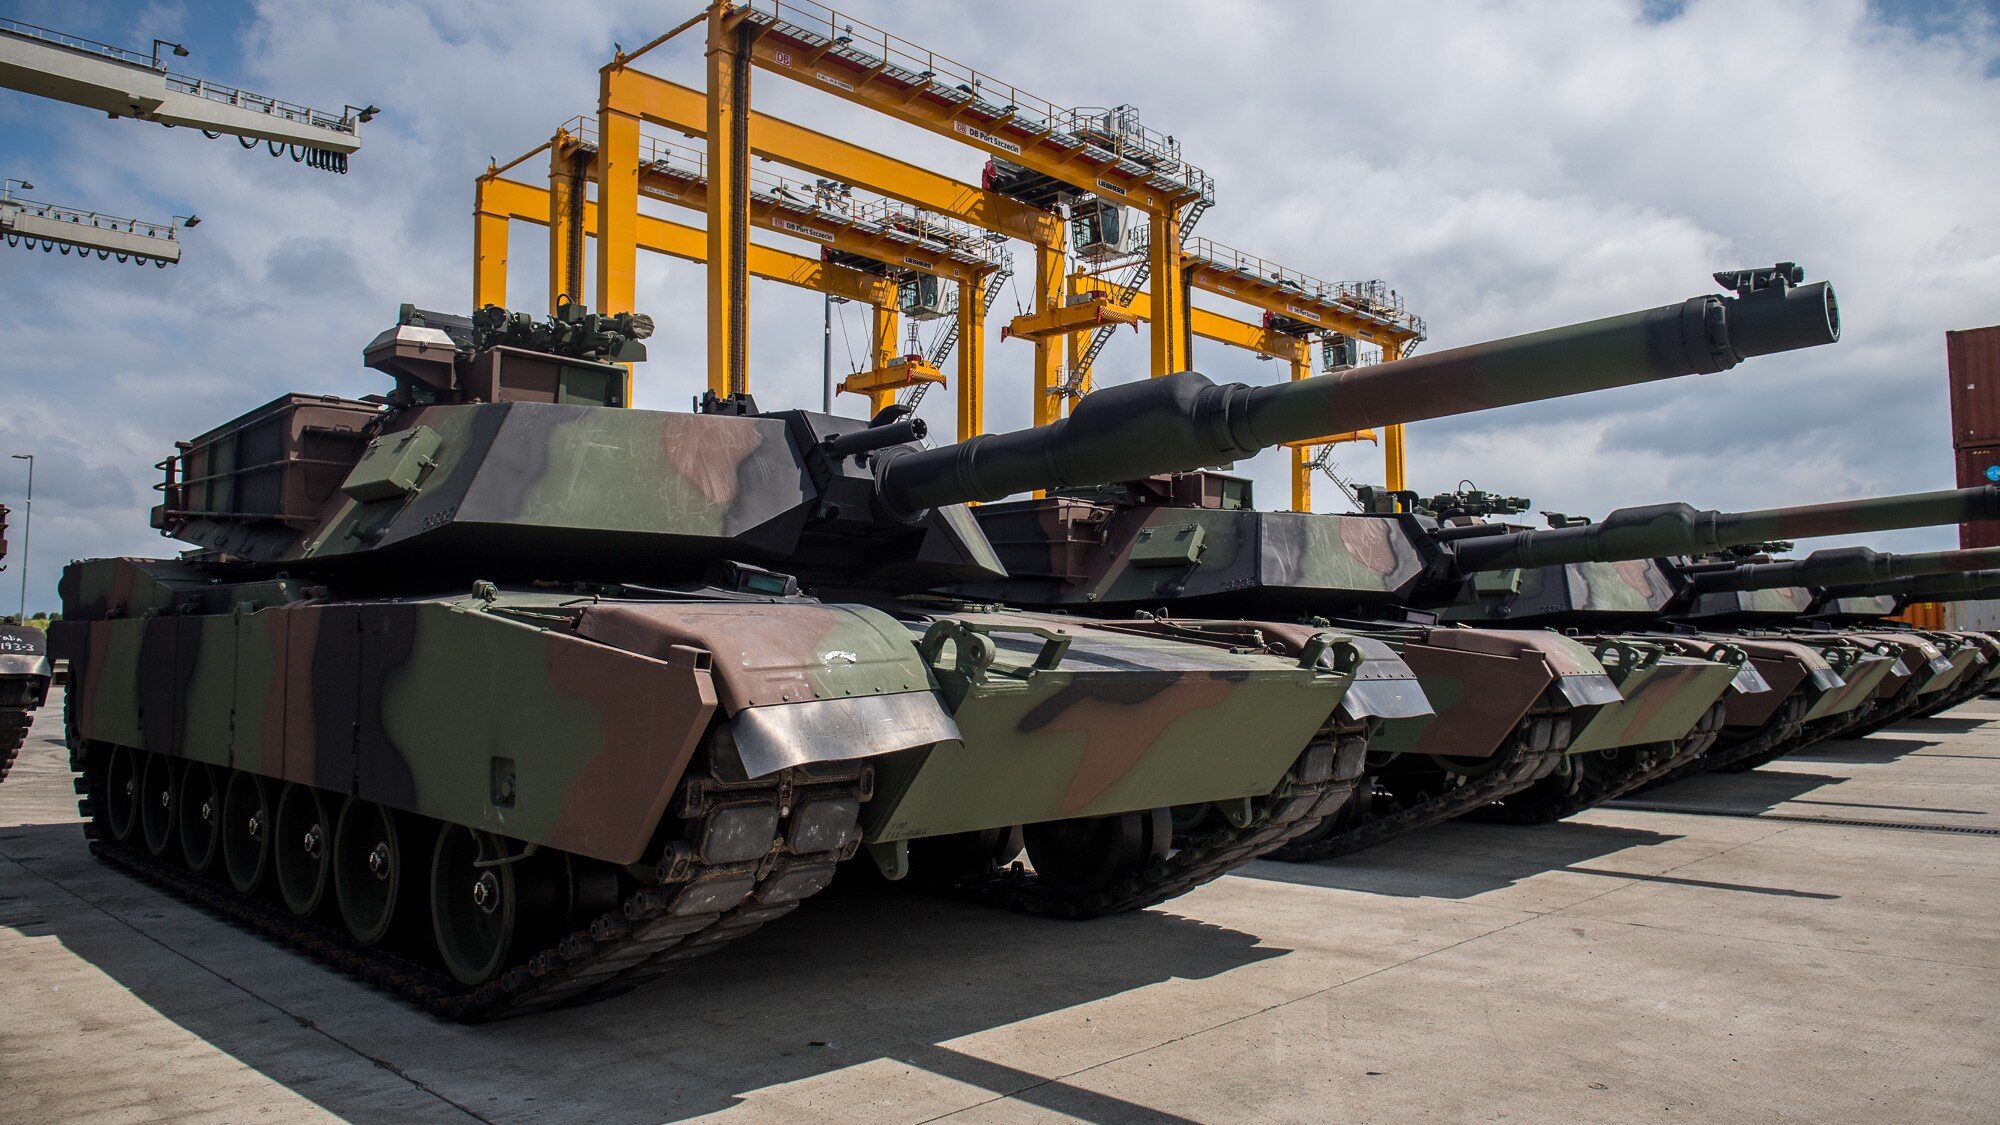 Poland - NATO's armored power?  The first Abrams tanks arrived in the country